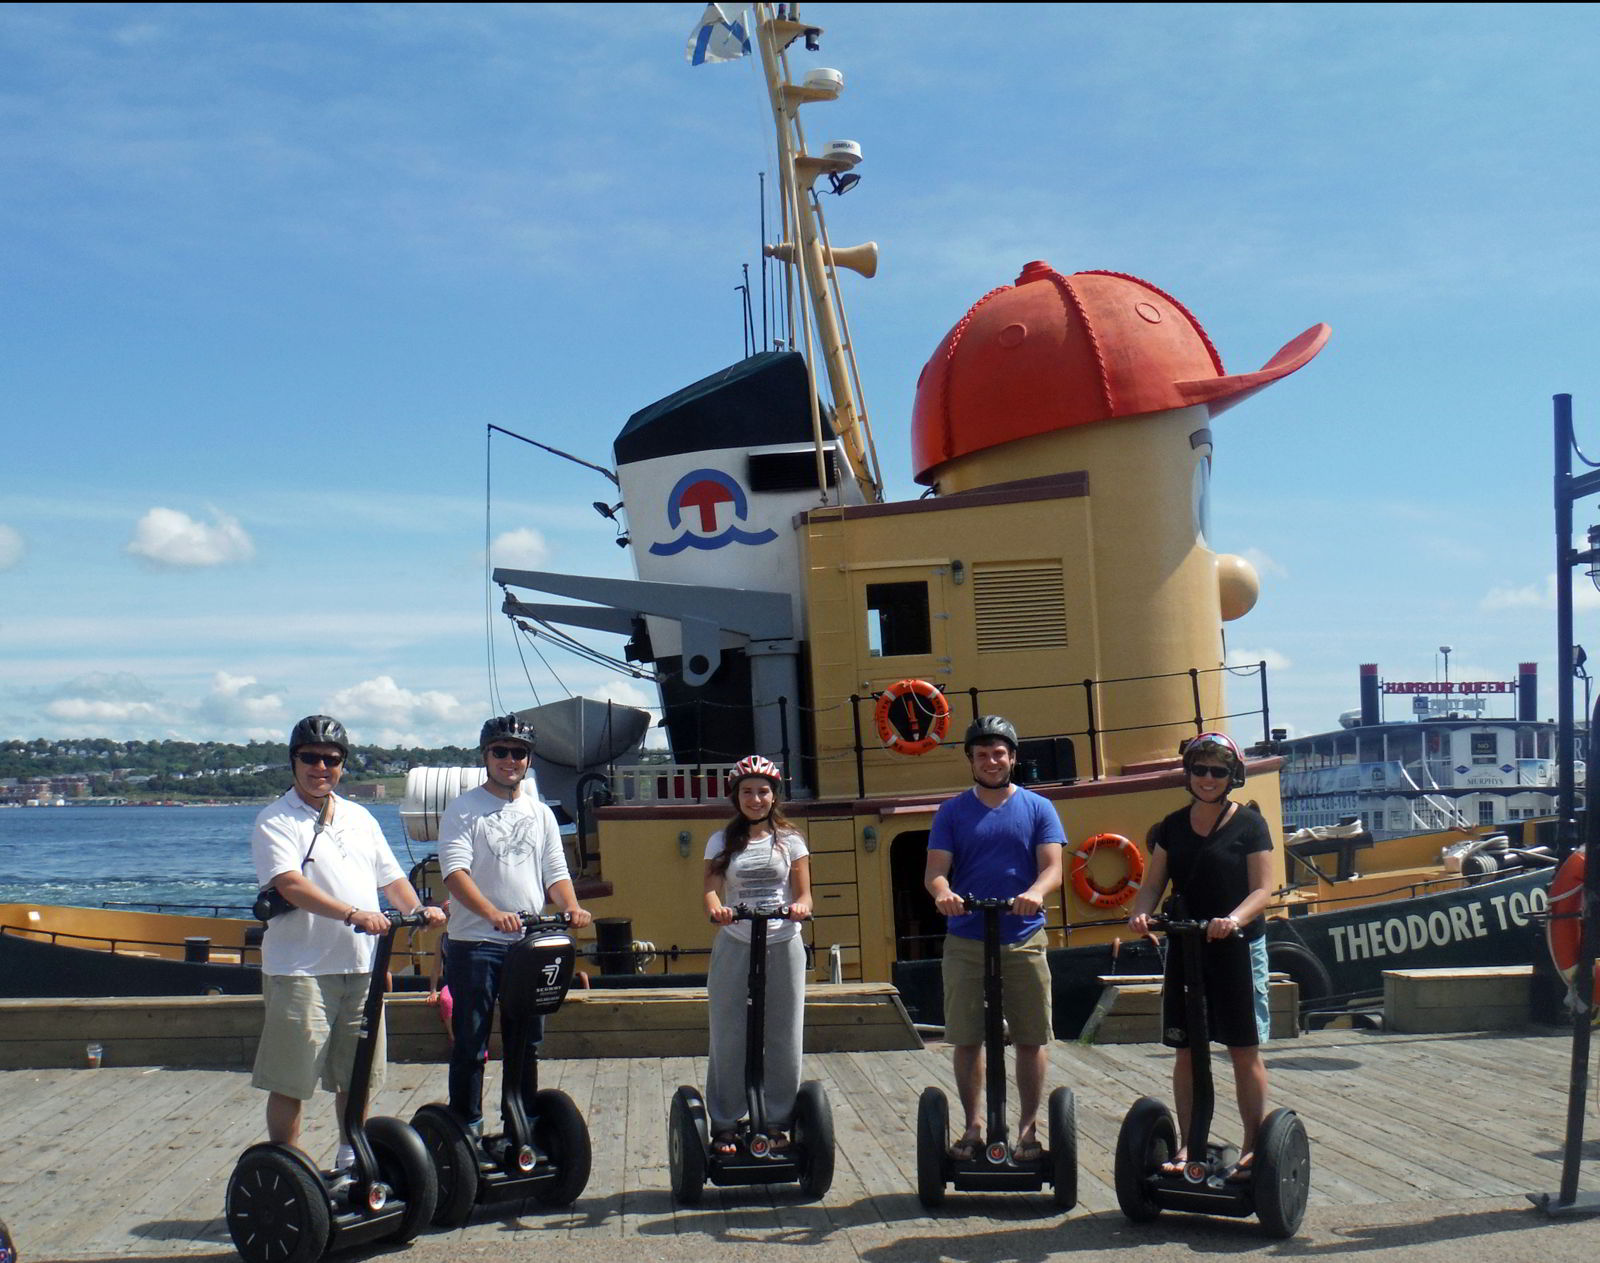 An image of a family on a Segway tour of the Halifax harbor in Halifax, Nova Scotia Canada - Halifax tours